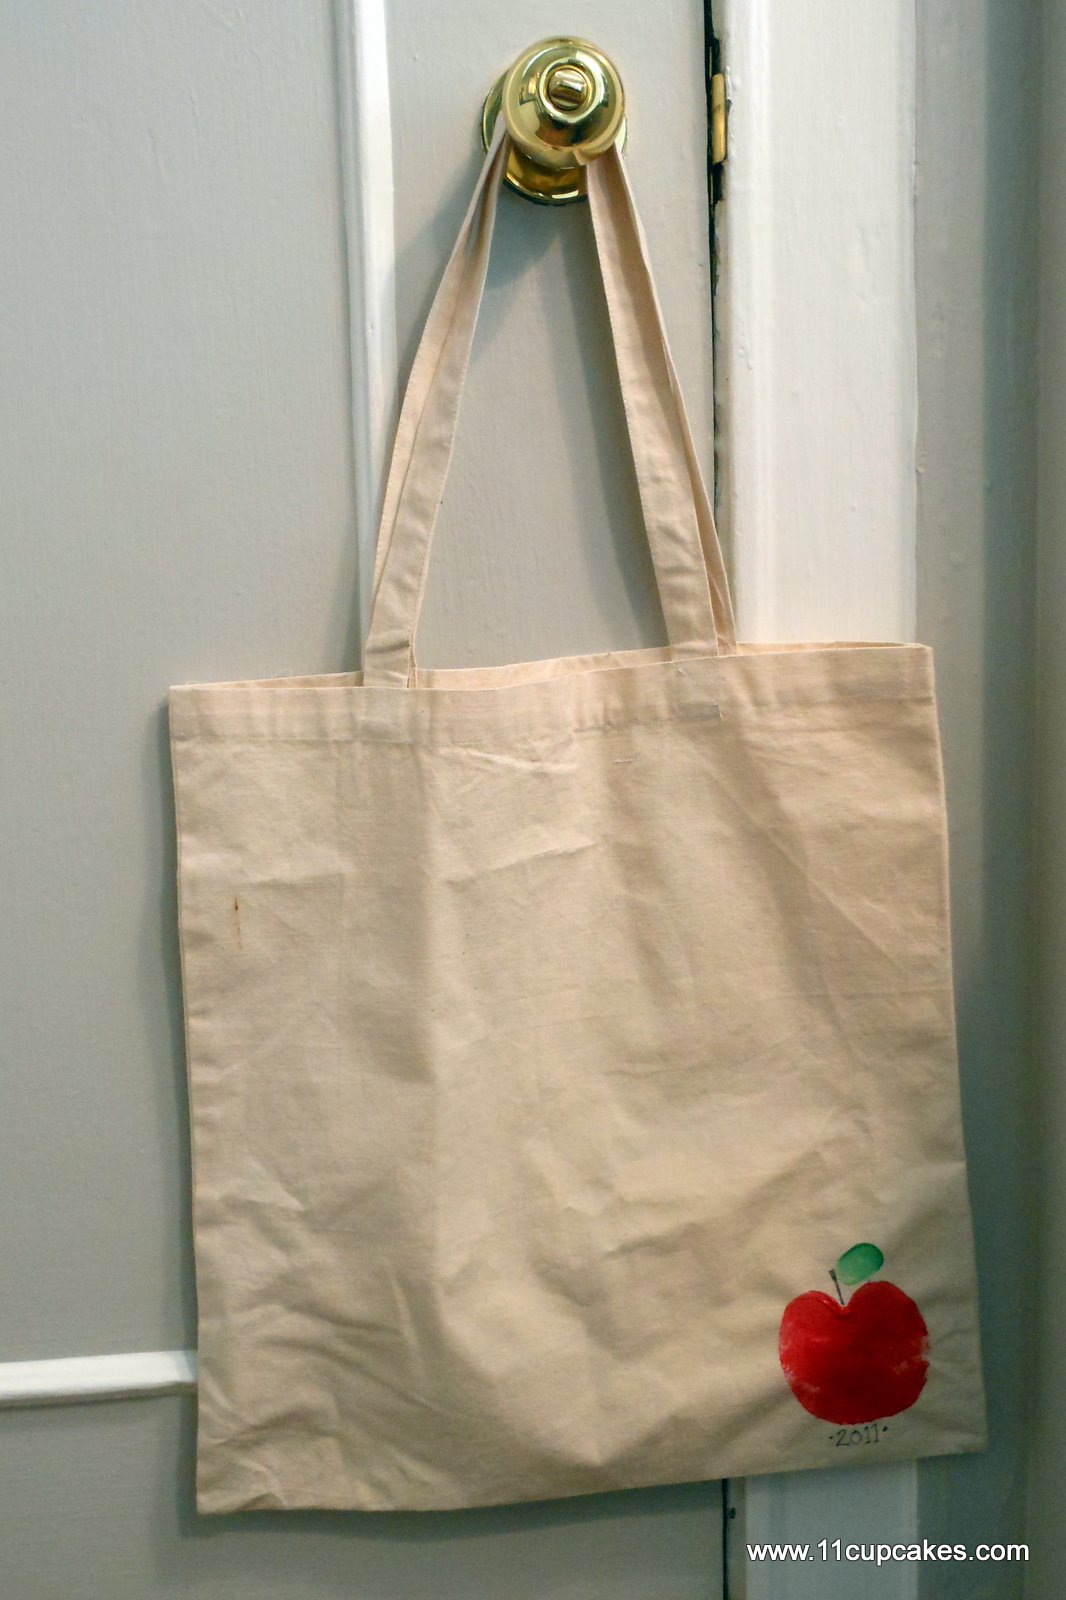 Apple Picking Party: Apple Stamped Totes